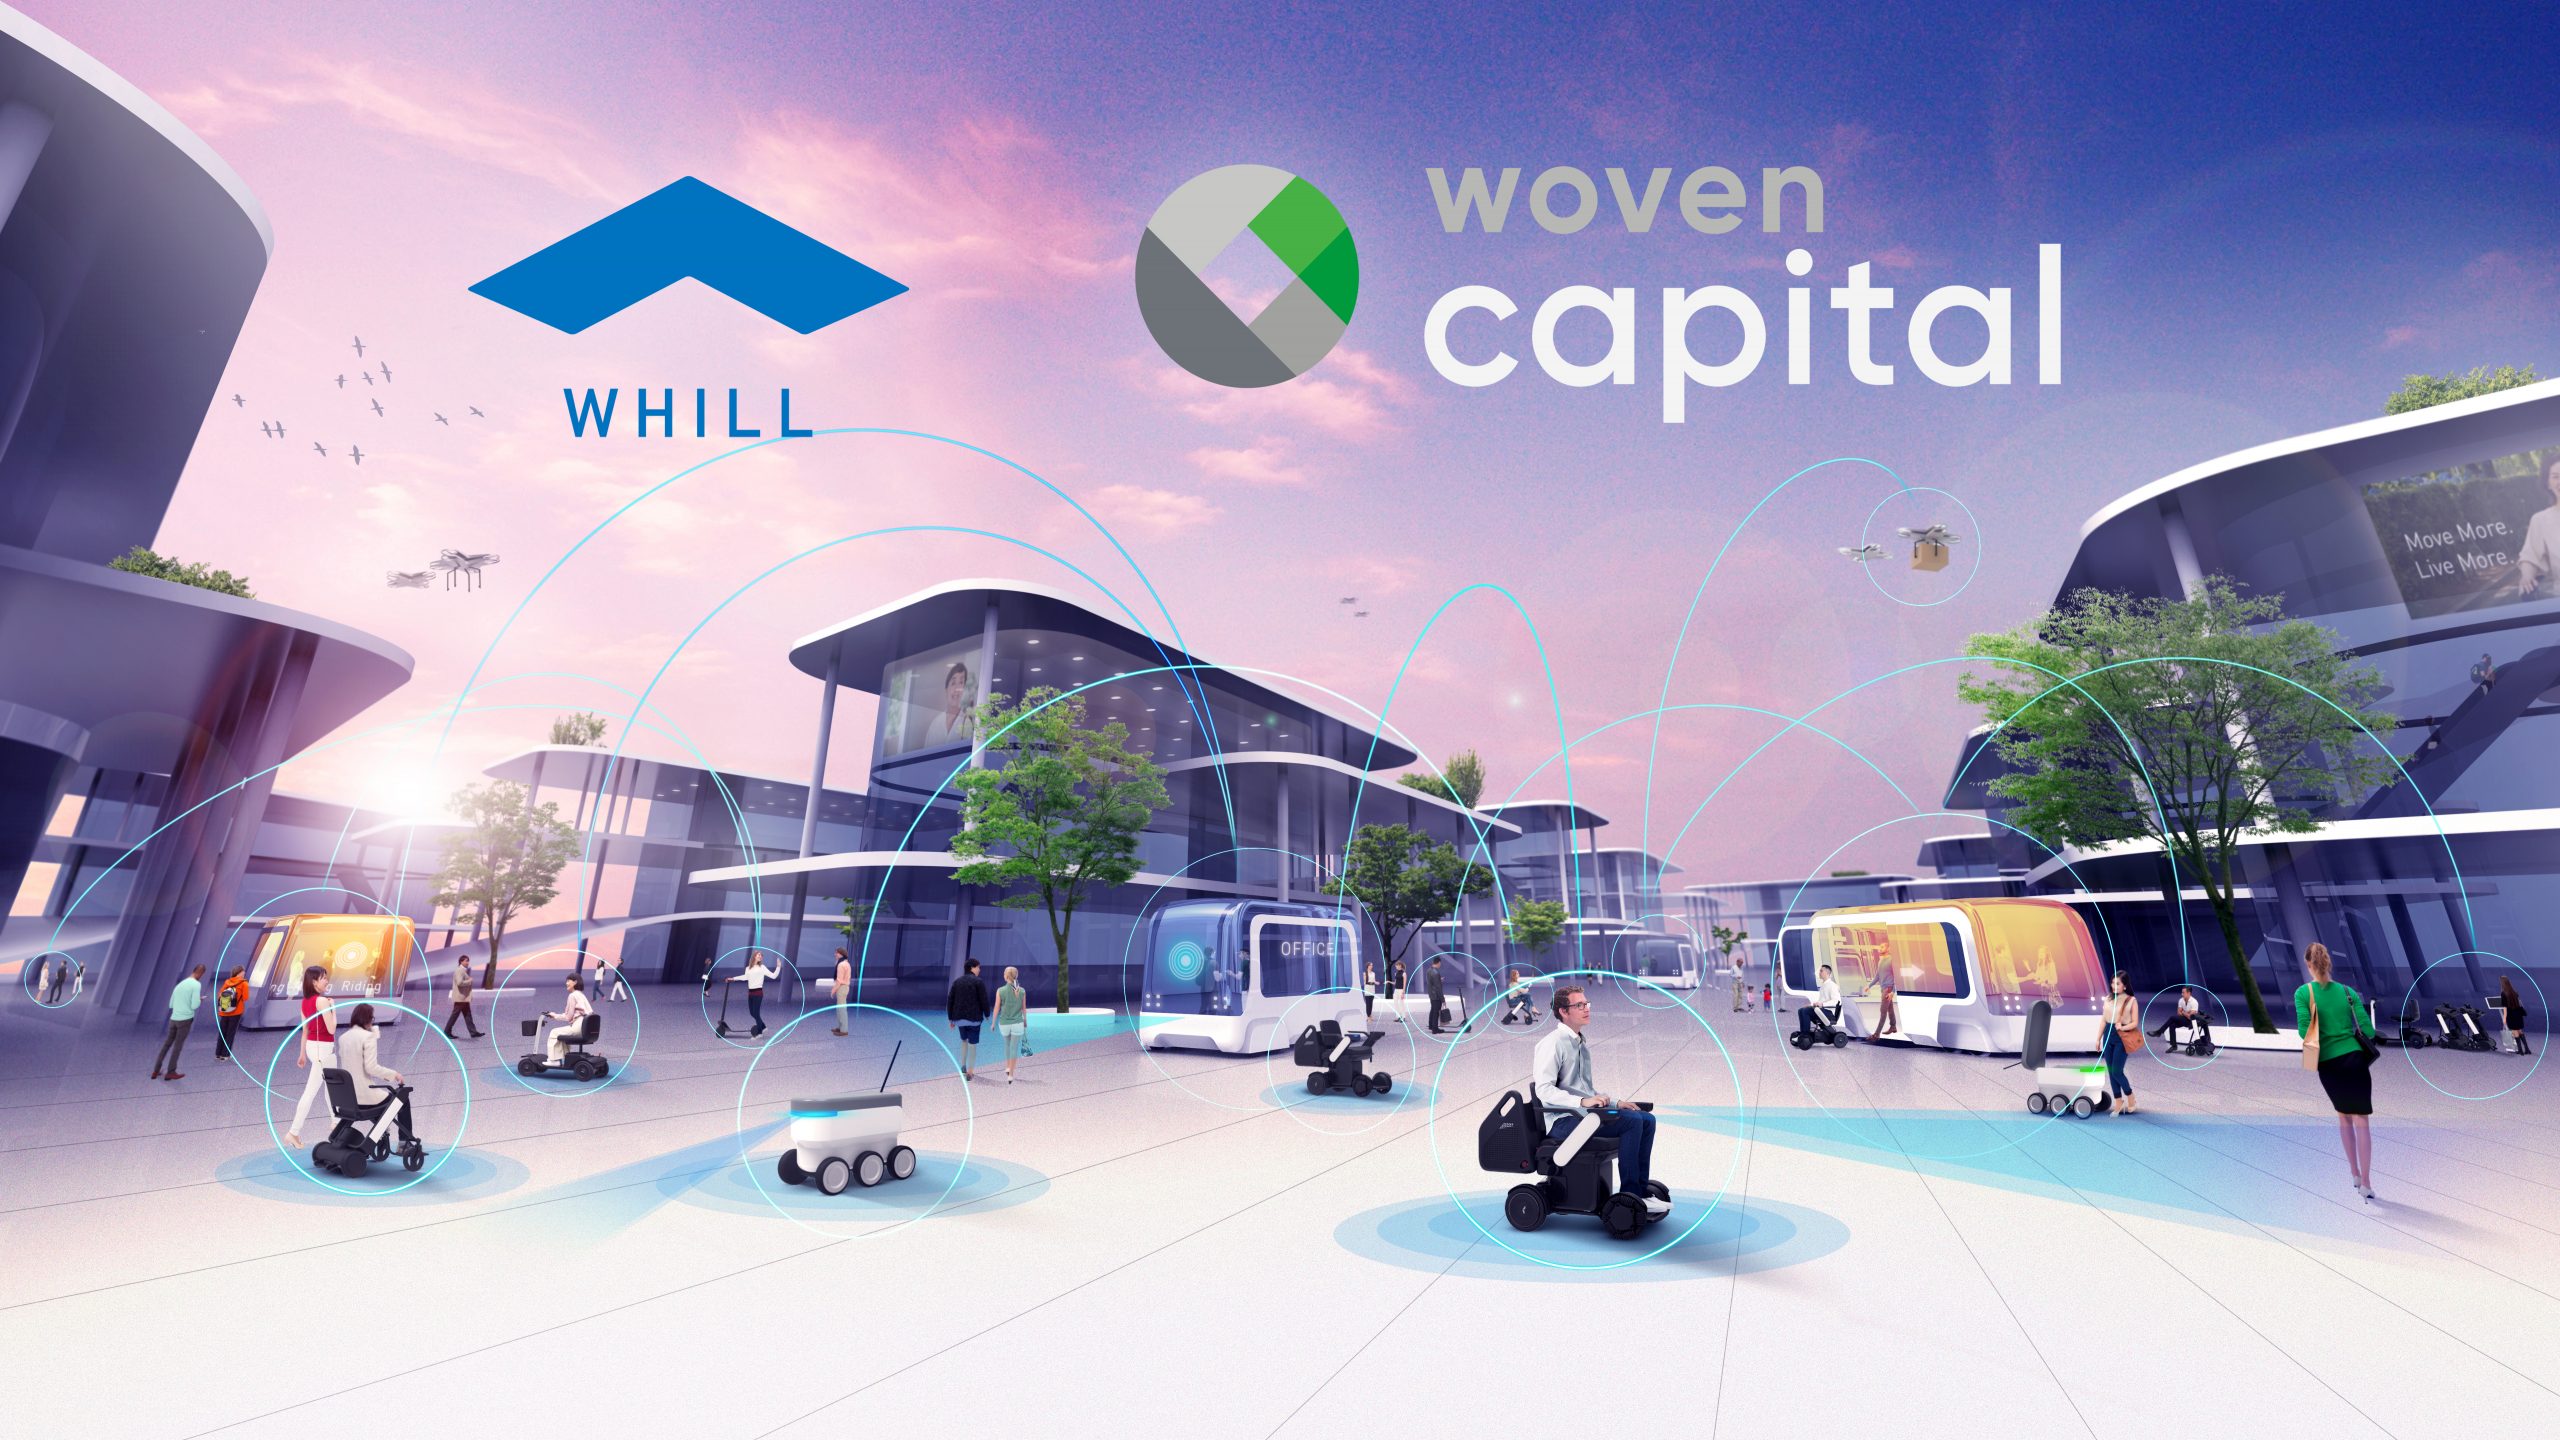 WHILL and Woven Capital Smart City Image